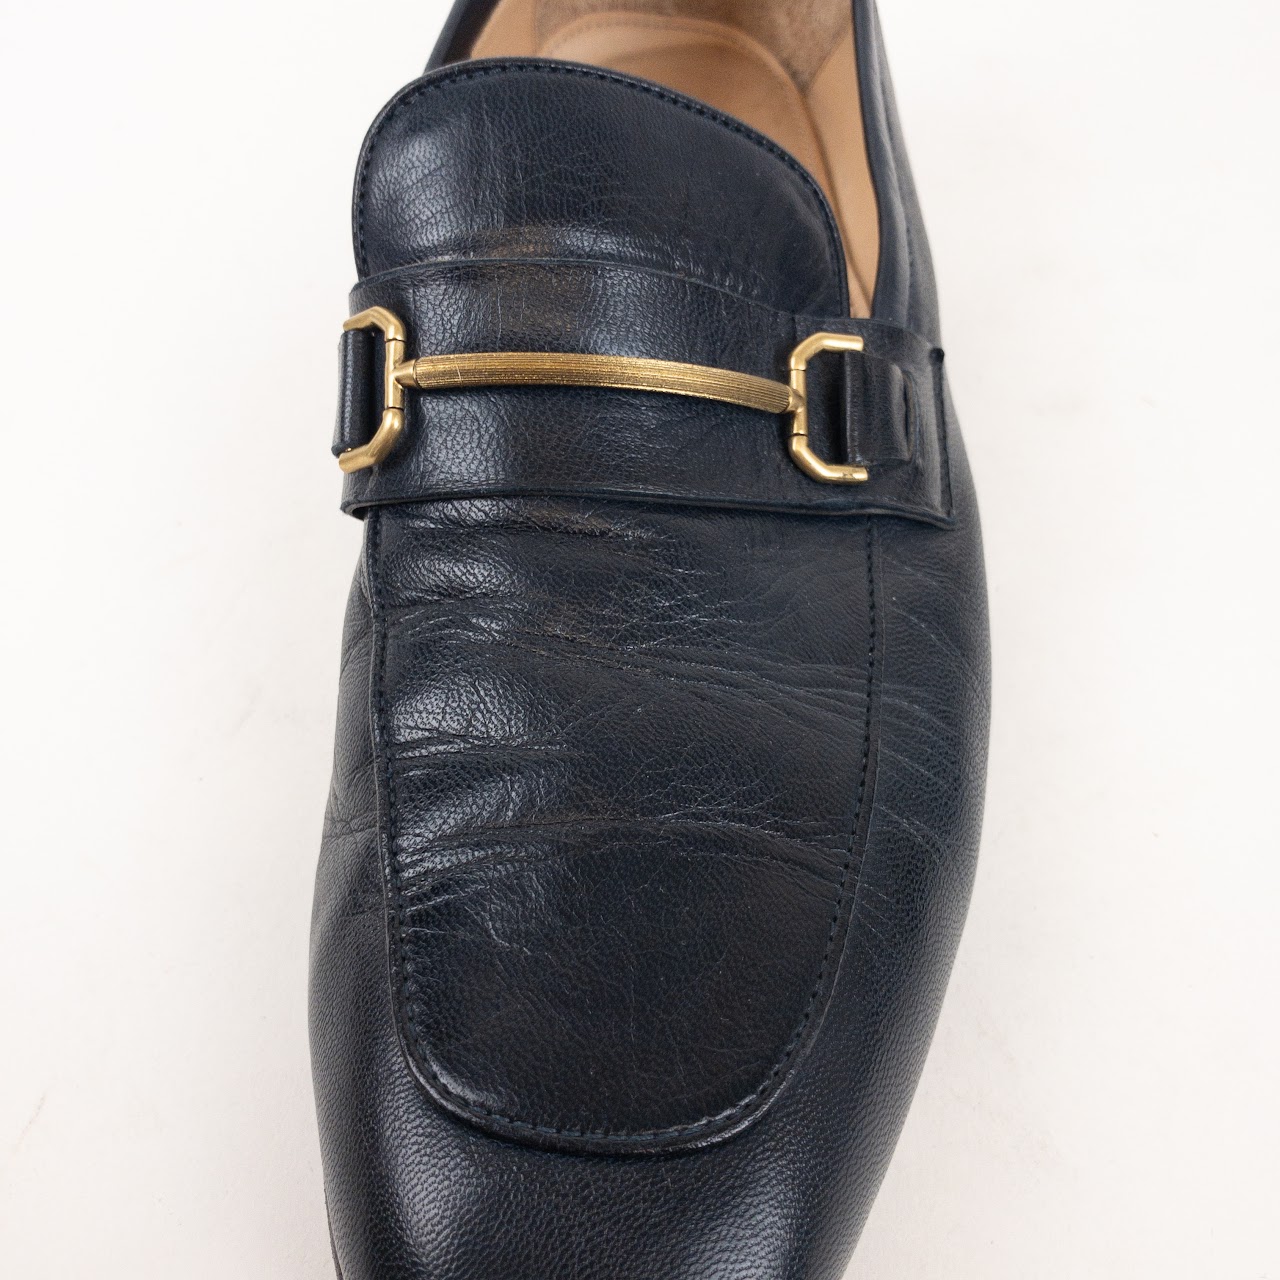 Dunhill Dark Blue Leather Horsebit Loafers